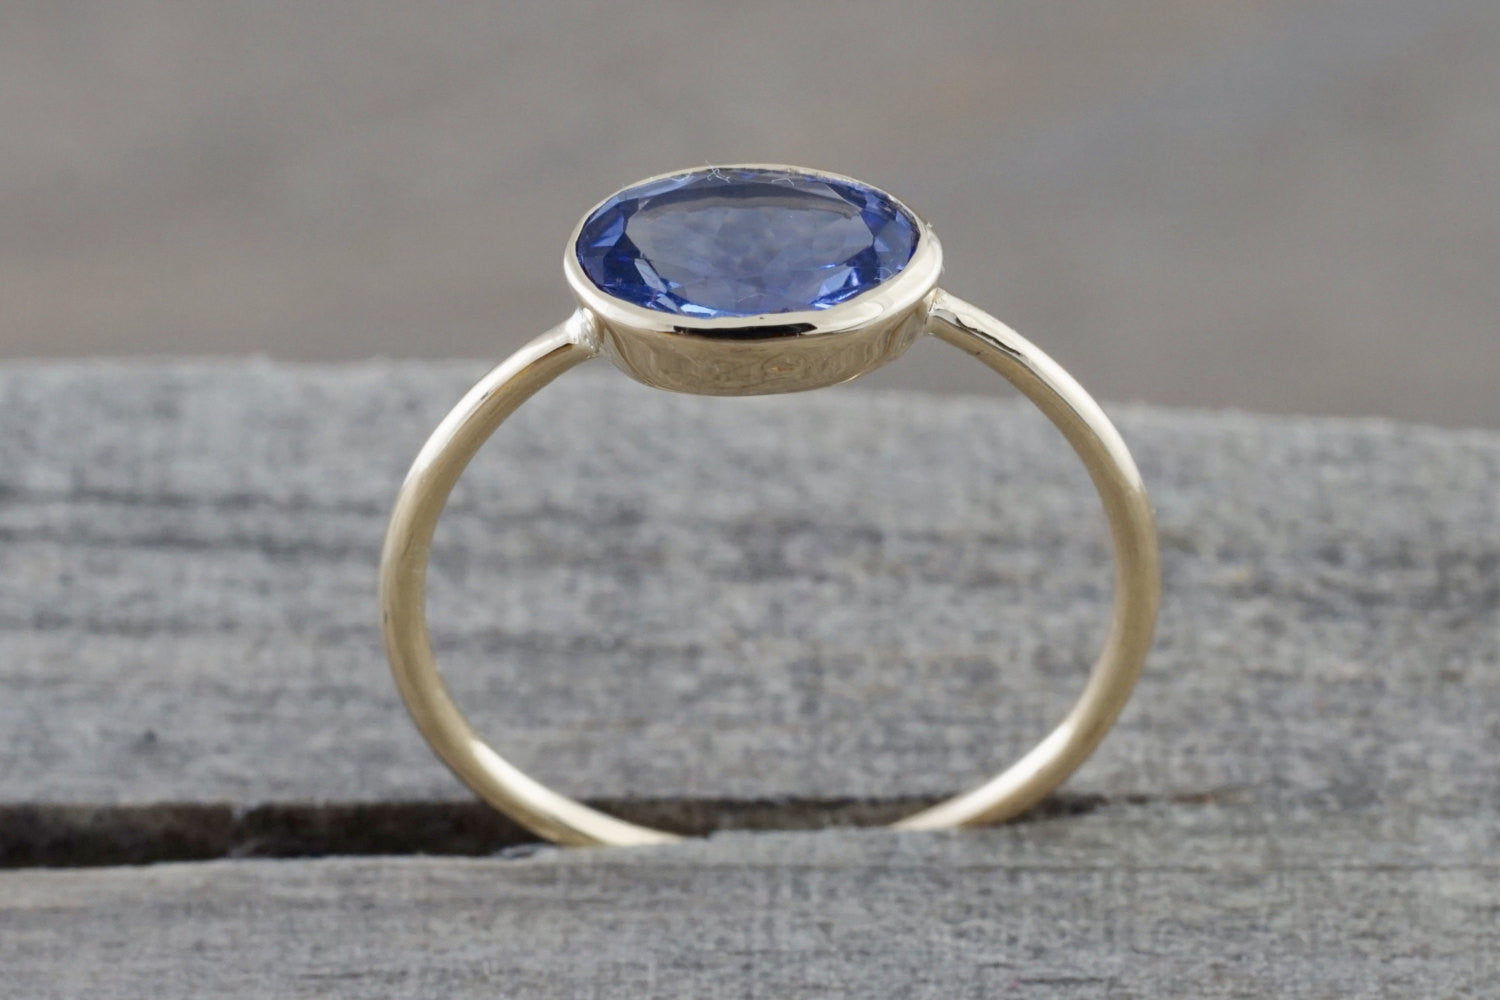 0.80 Carats Exotic Tanzanite is set on Solid 14k Yellow Gold Oval Bezel Band Ring - Brilliant Facets